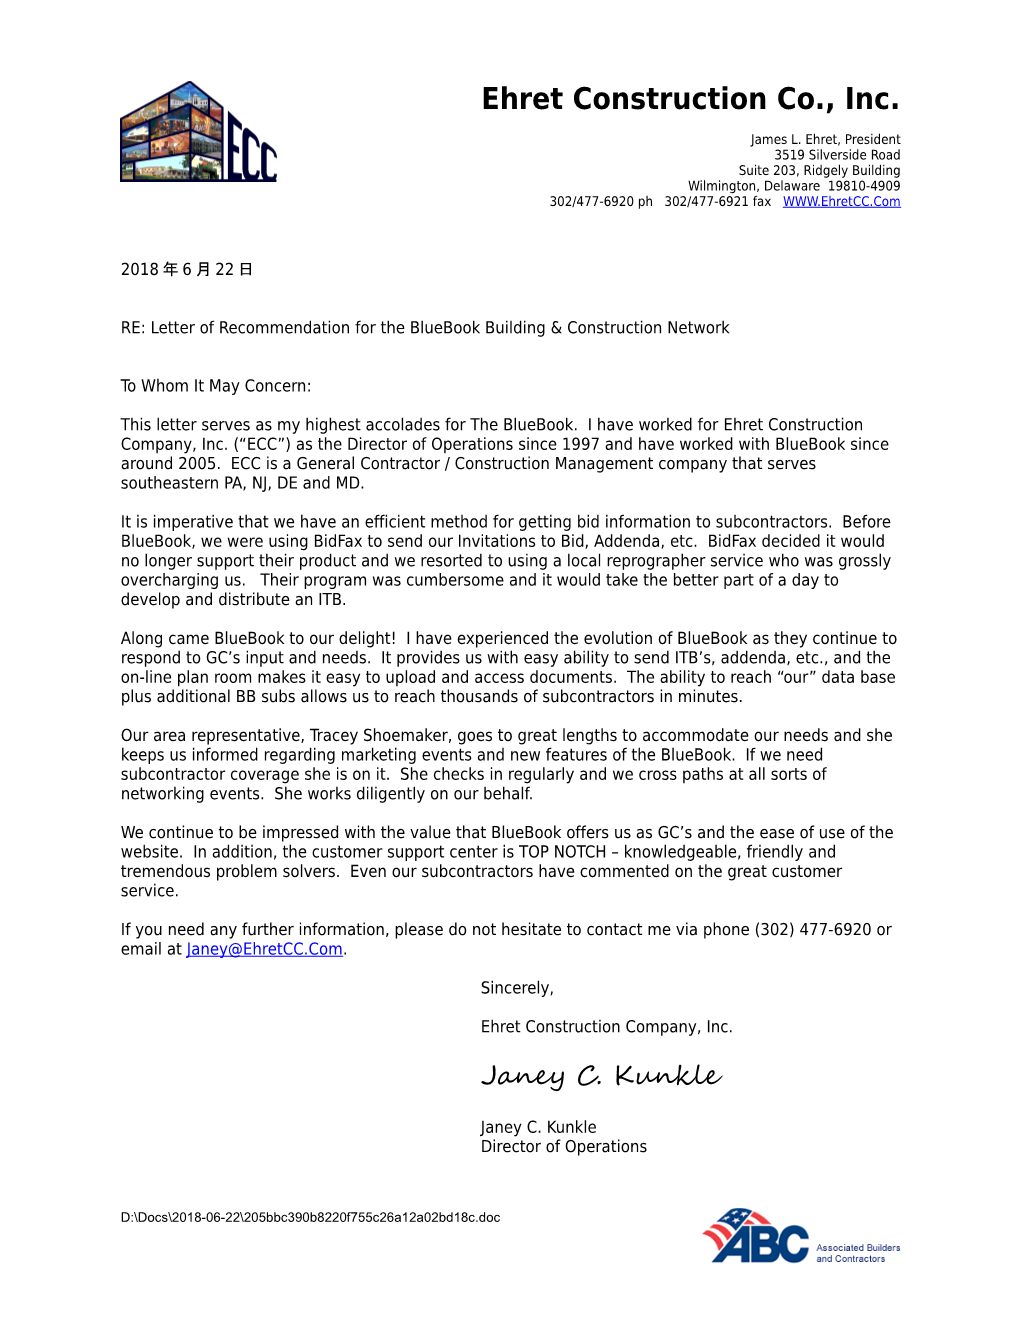 RE: Letter of Recommendation for the Bluebook Building & Construction Network